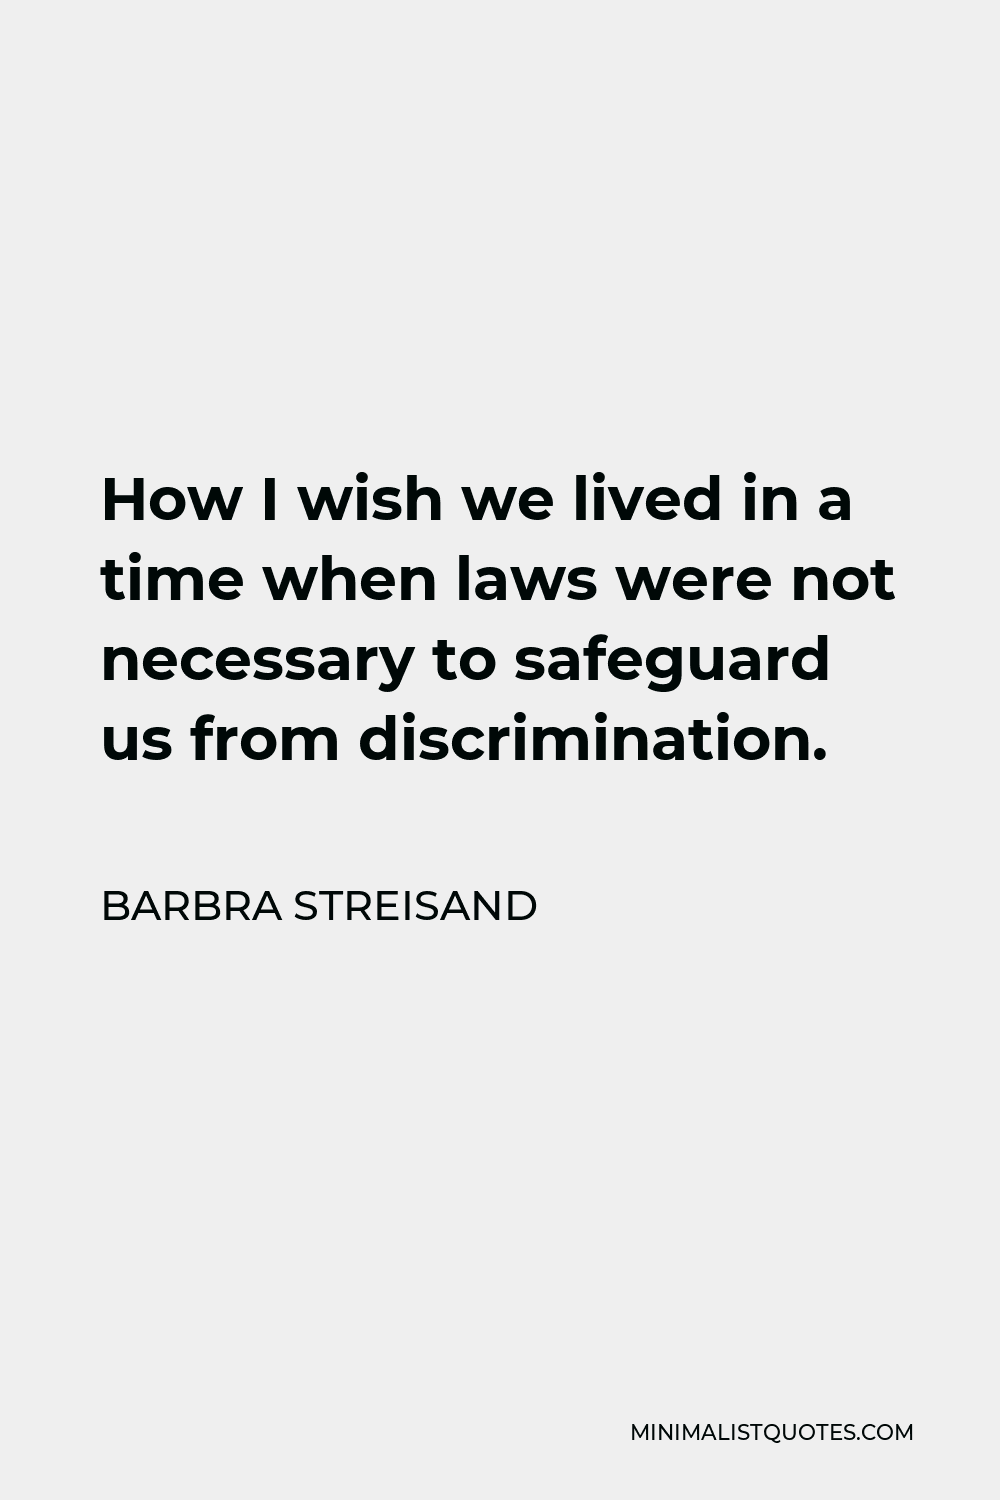 Barbra Streisand Quote - How I wish we lived in a time when laws were not necessary to safeguard us from discrimination.